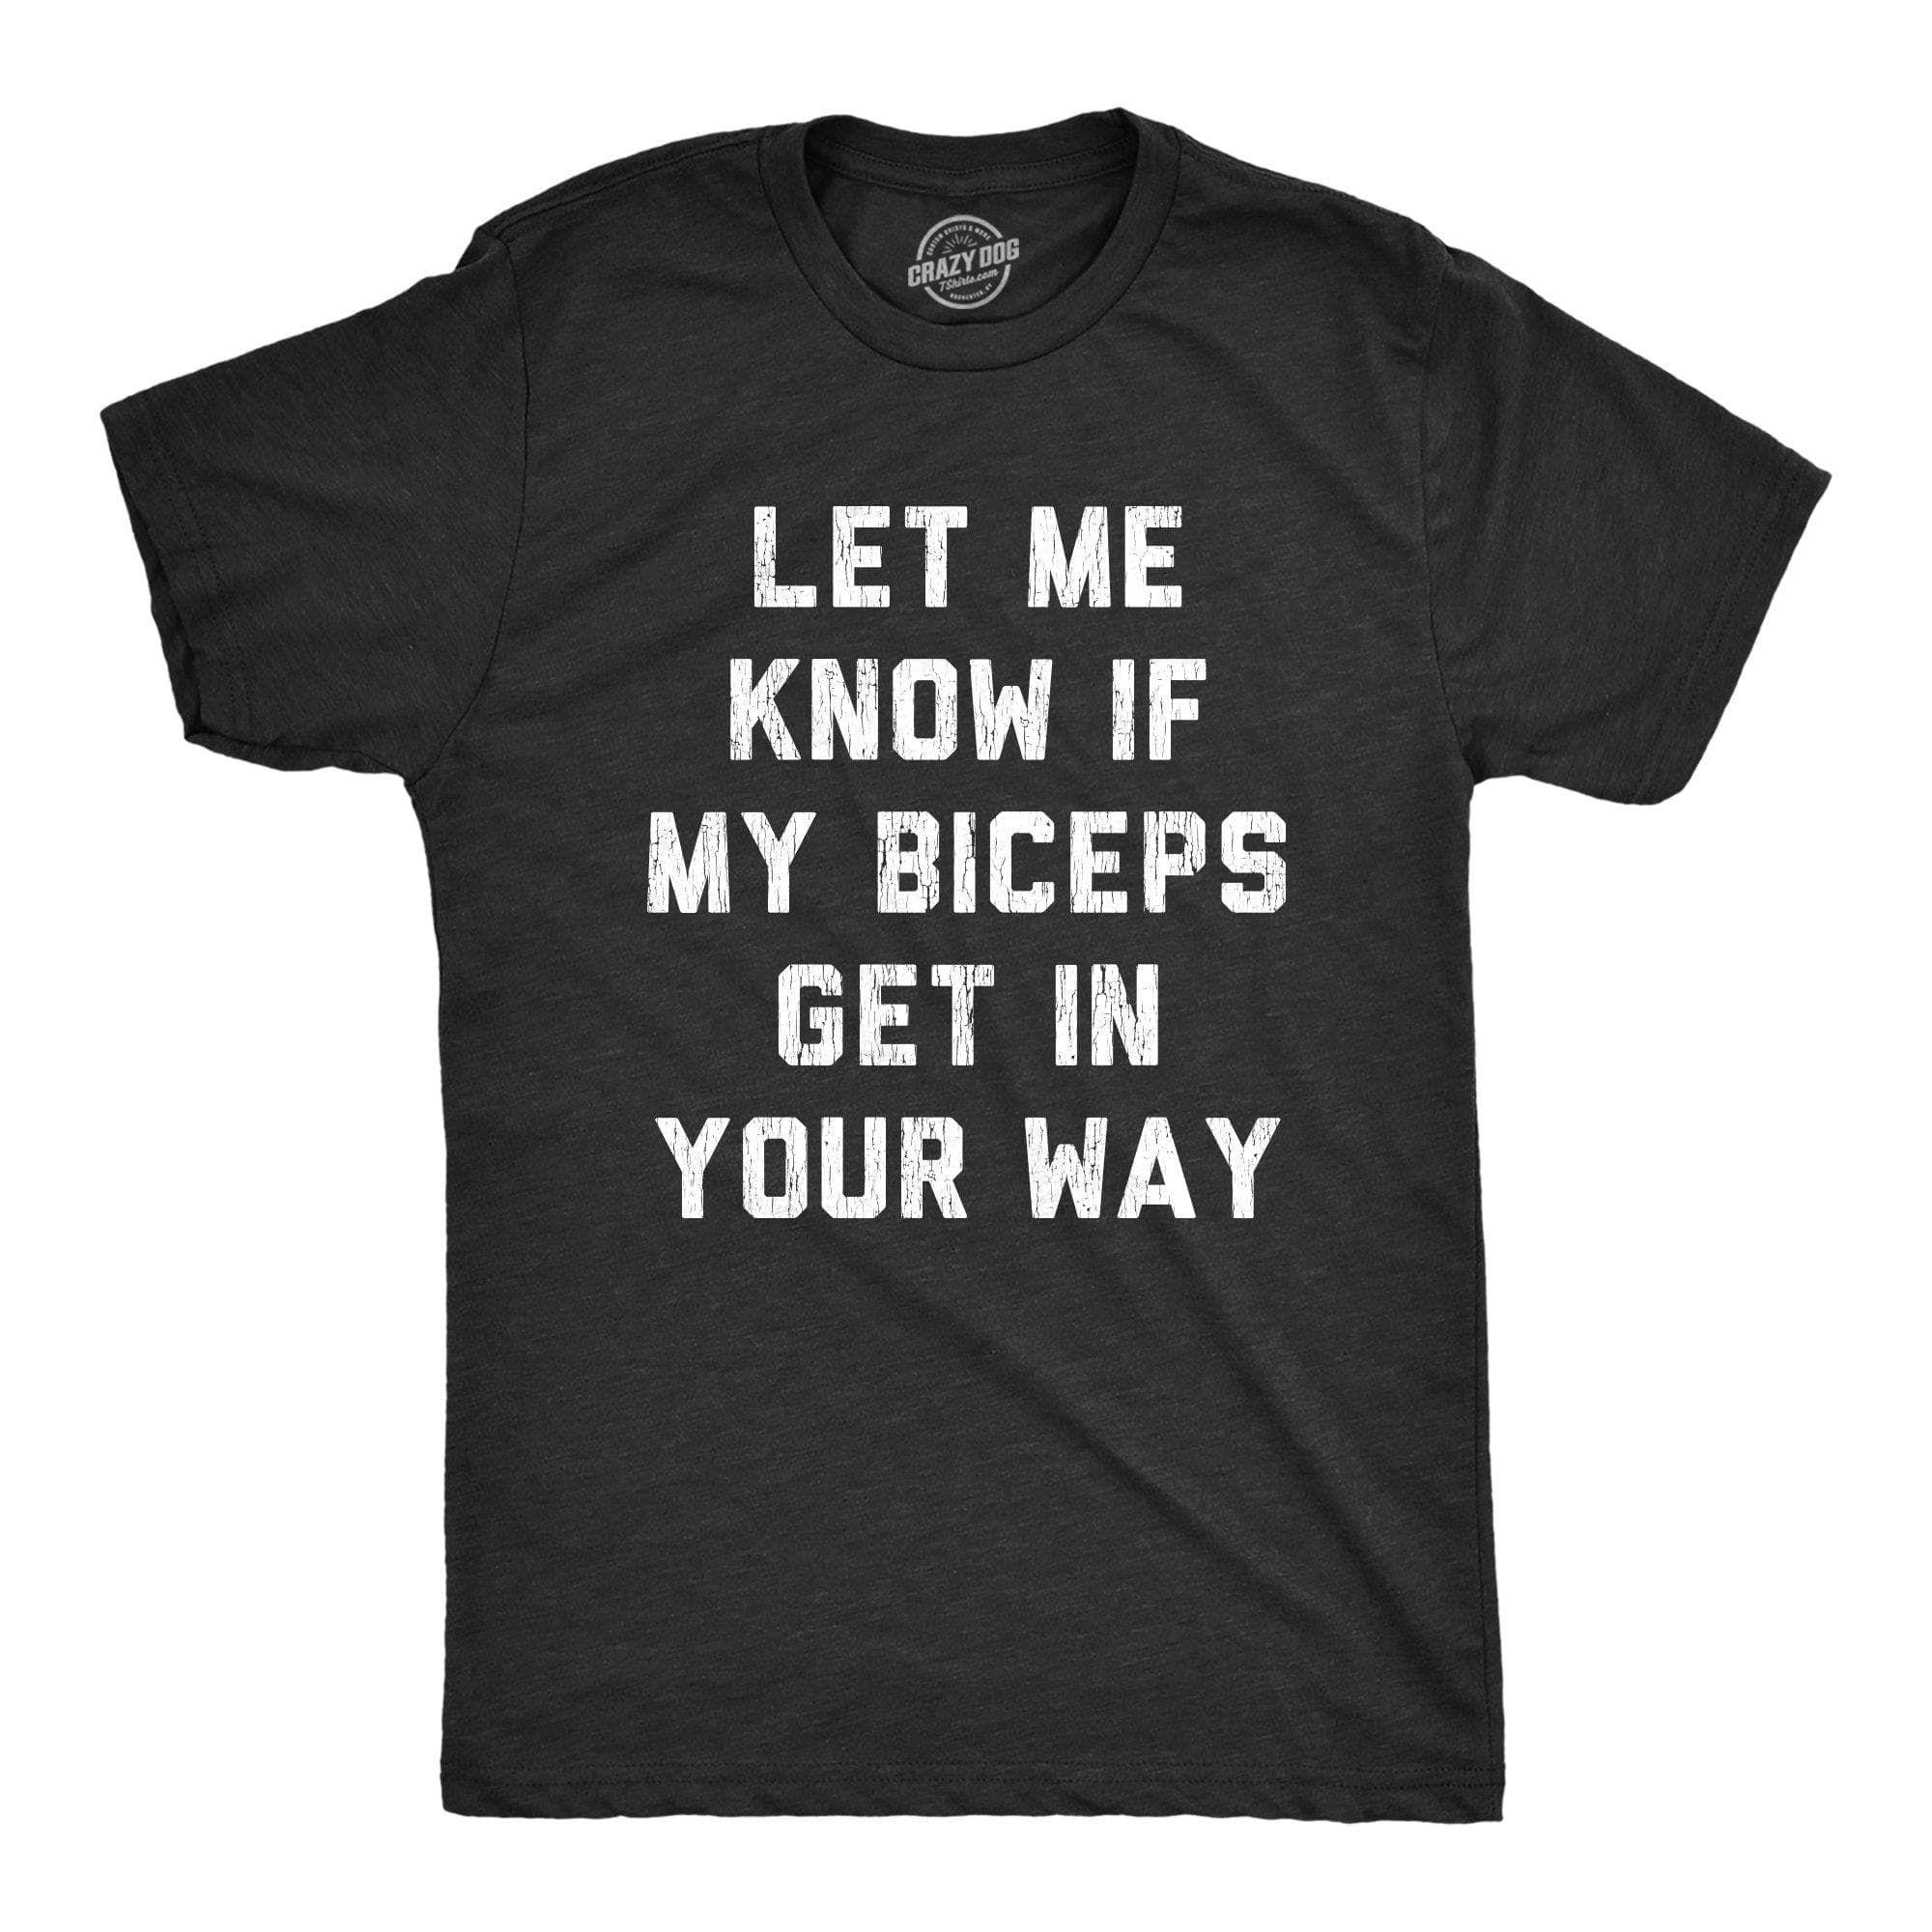 Let Me Know If My Biceps Get In Your Way Men's Tshirt - Crazy Dog T-Shirts